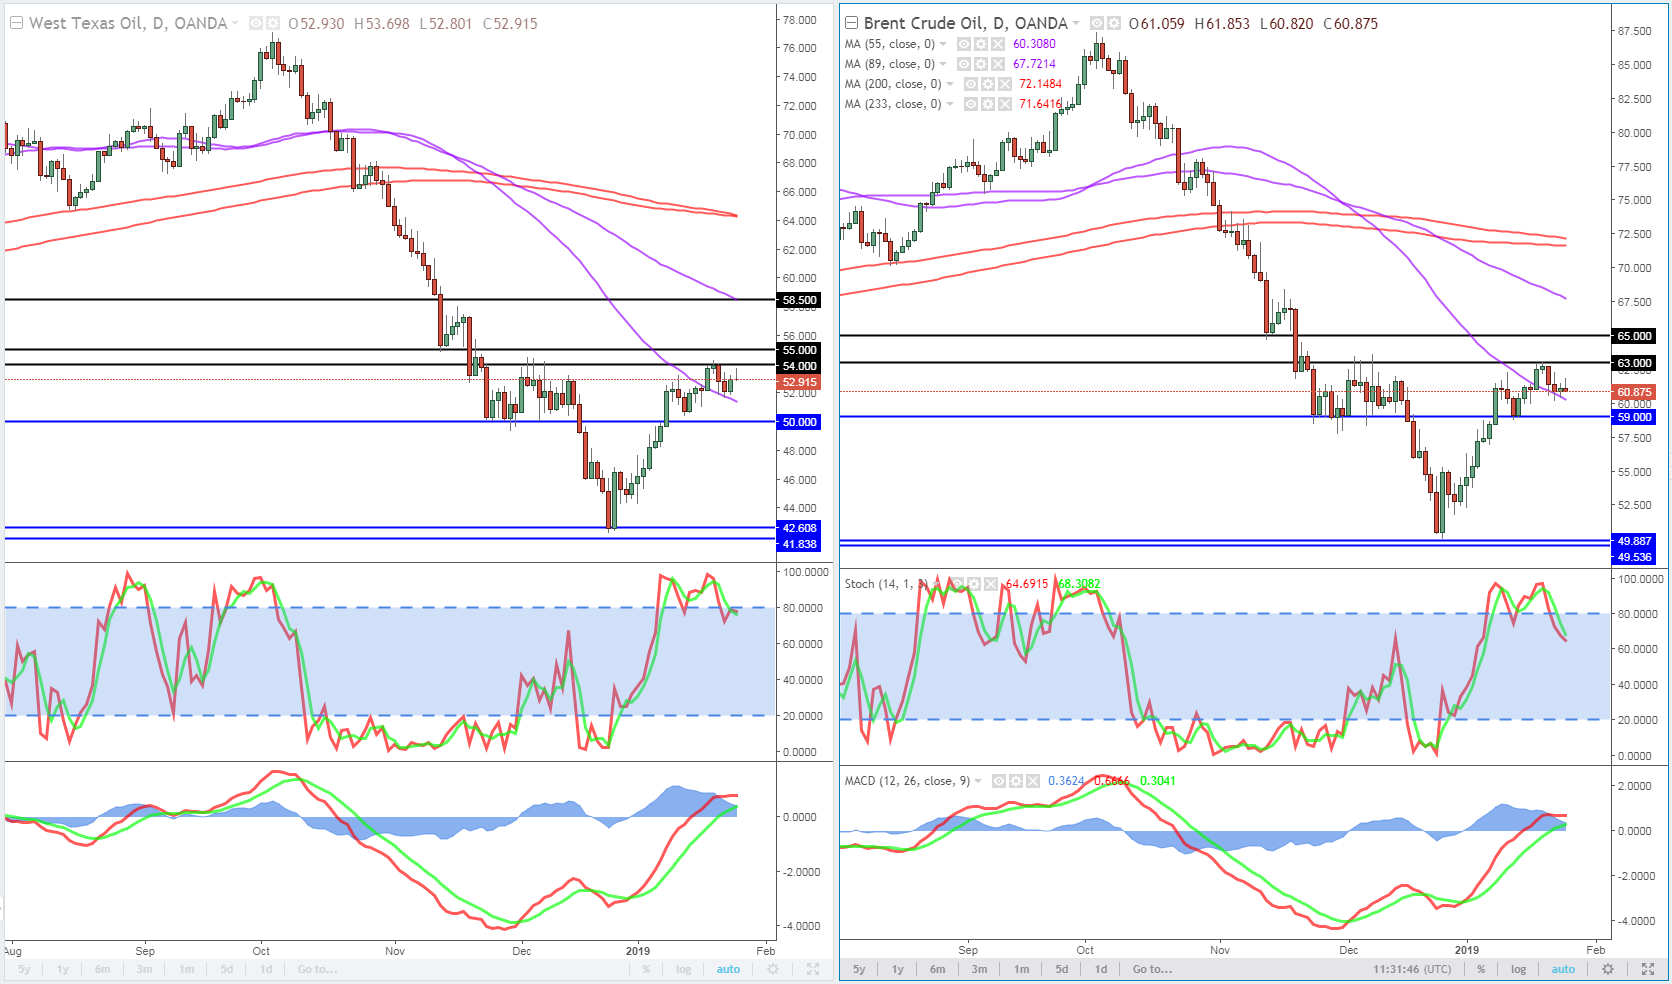 Oil (WTI and Brent) Daily Chart